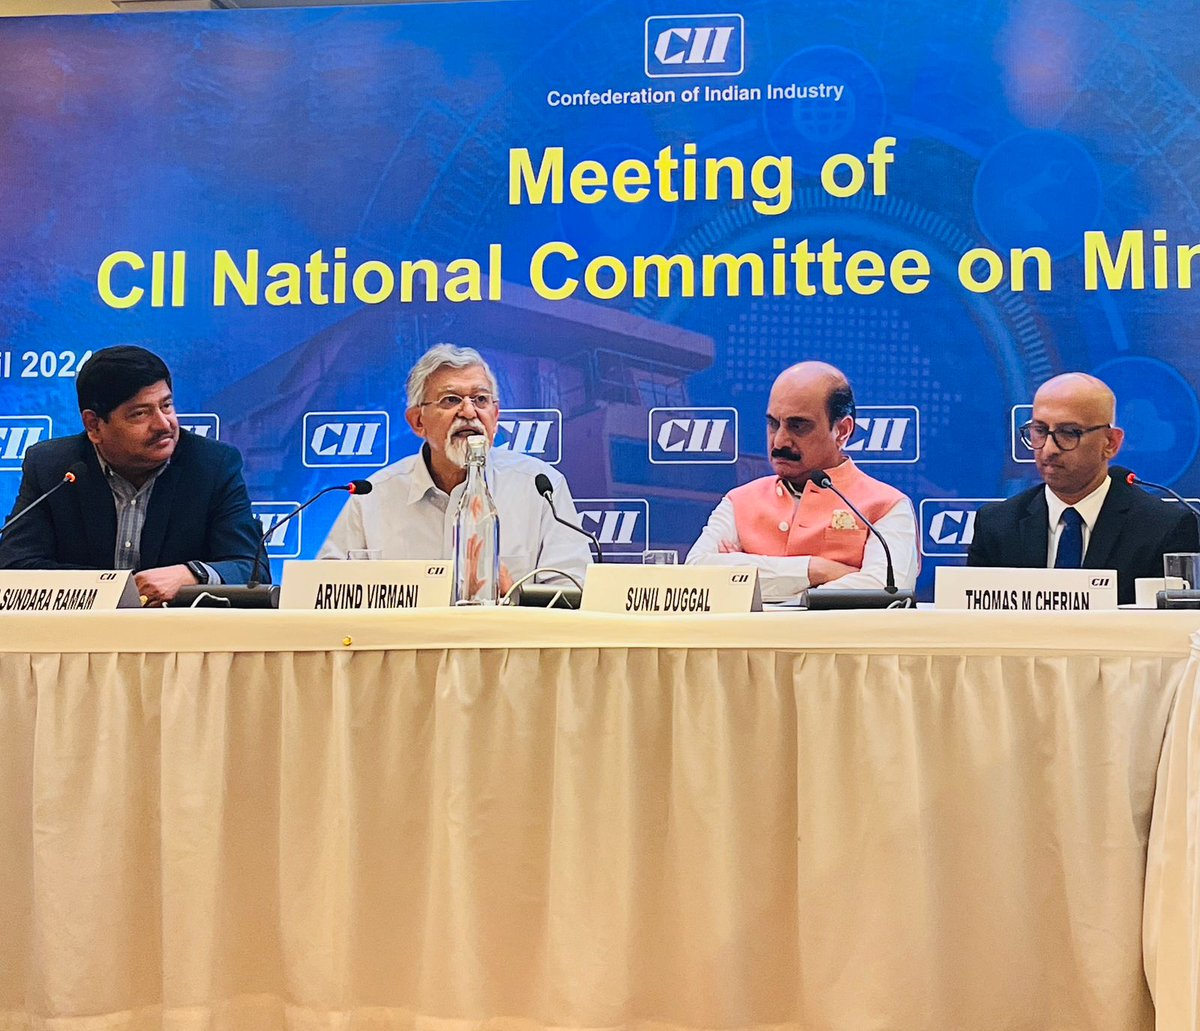 “As India faces the challenge of multiple charges on auction --single auction, zero tariff & zero royalty on critical minerals will facilitate #EODB” 

~Dr Arvind Virmani @dravirmani, Member, NITI Aayog 
at interactive session of CII National Committee Meeting on Mining
[1/3]